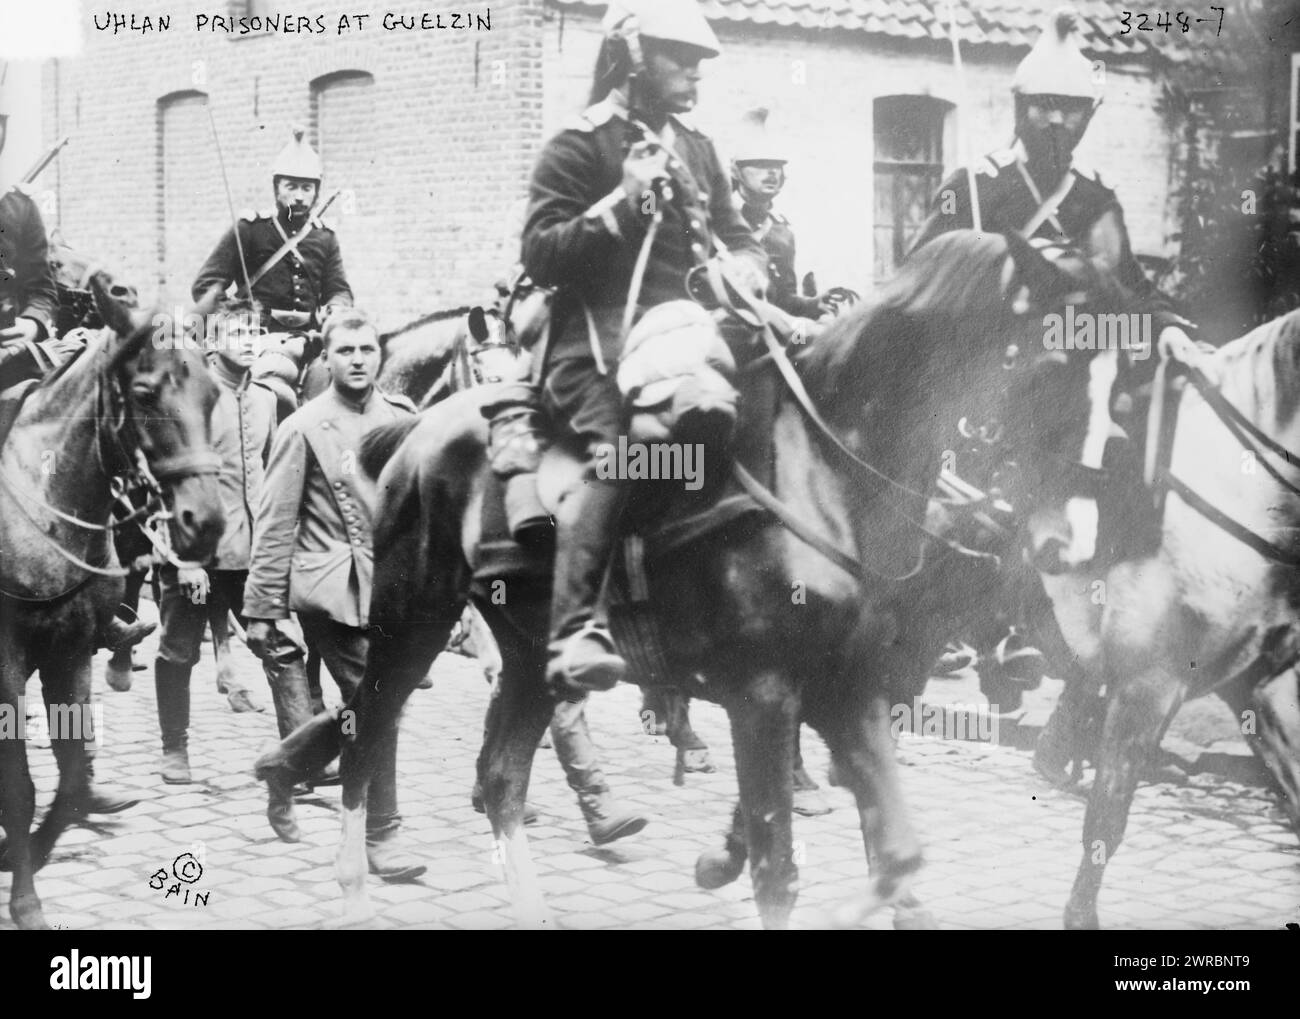 Uhlan prisoners at Guelzin, Photograph shows possibly Polish prisoners of war surrounded by the French calvary during World War I., between ca. 1914 and ca. 1915, World War, 1914-1918, Glass negatives, 1 negative: glass Stock Photo